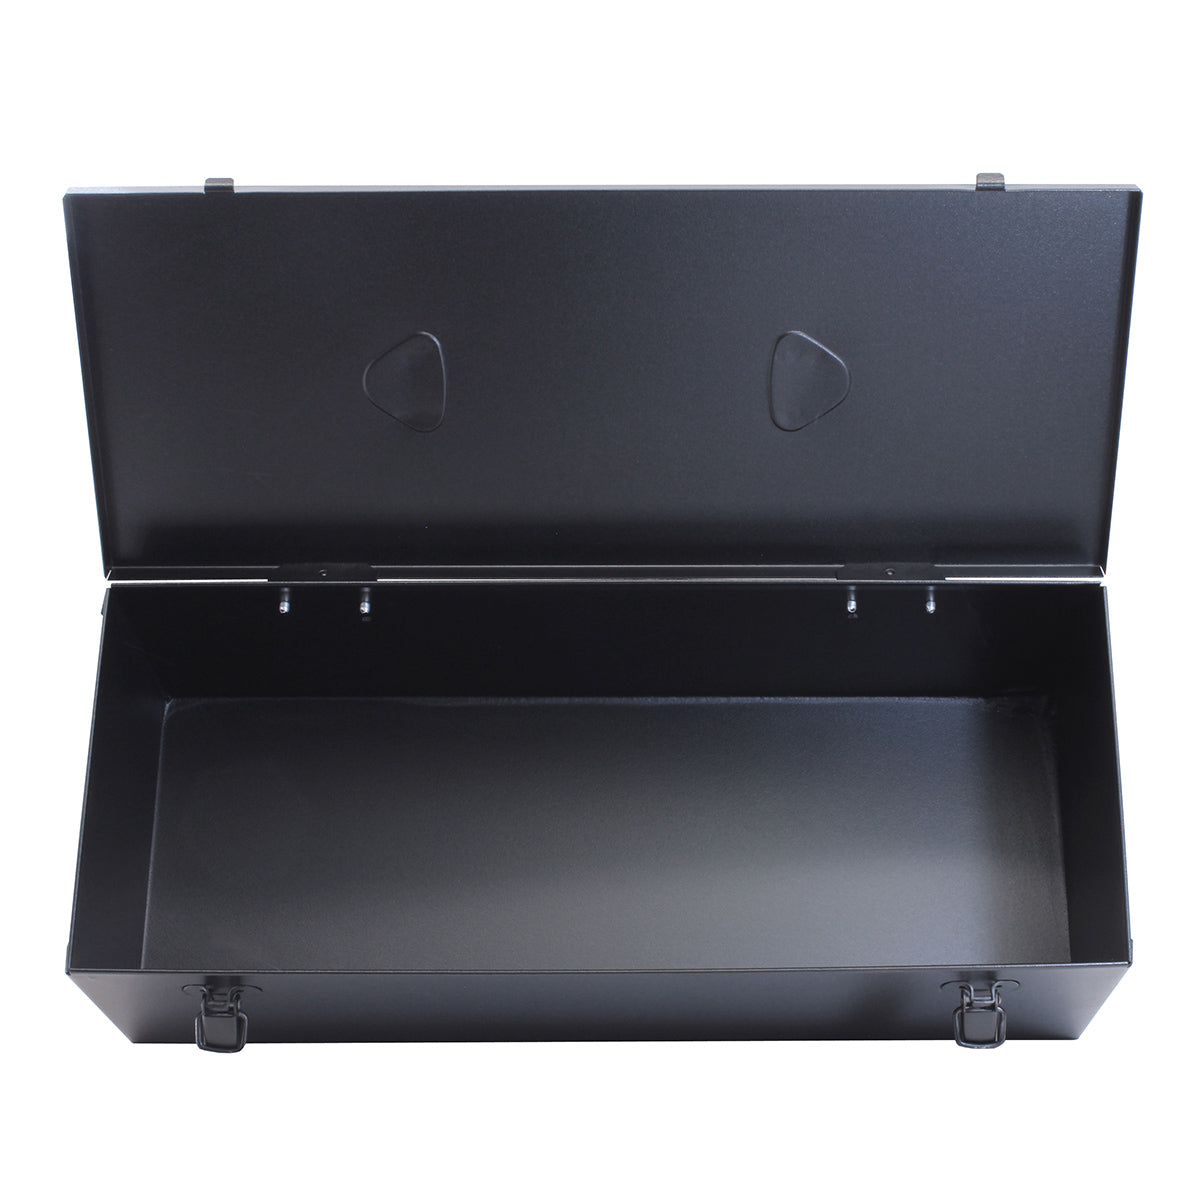 An open matte black hobby and tool box with a spacious interior and double toggle latches on the front of the box, displayed against a white background.